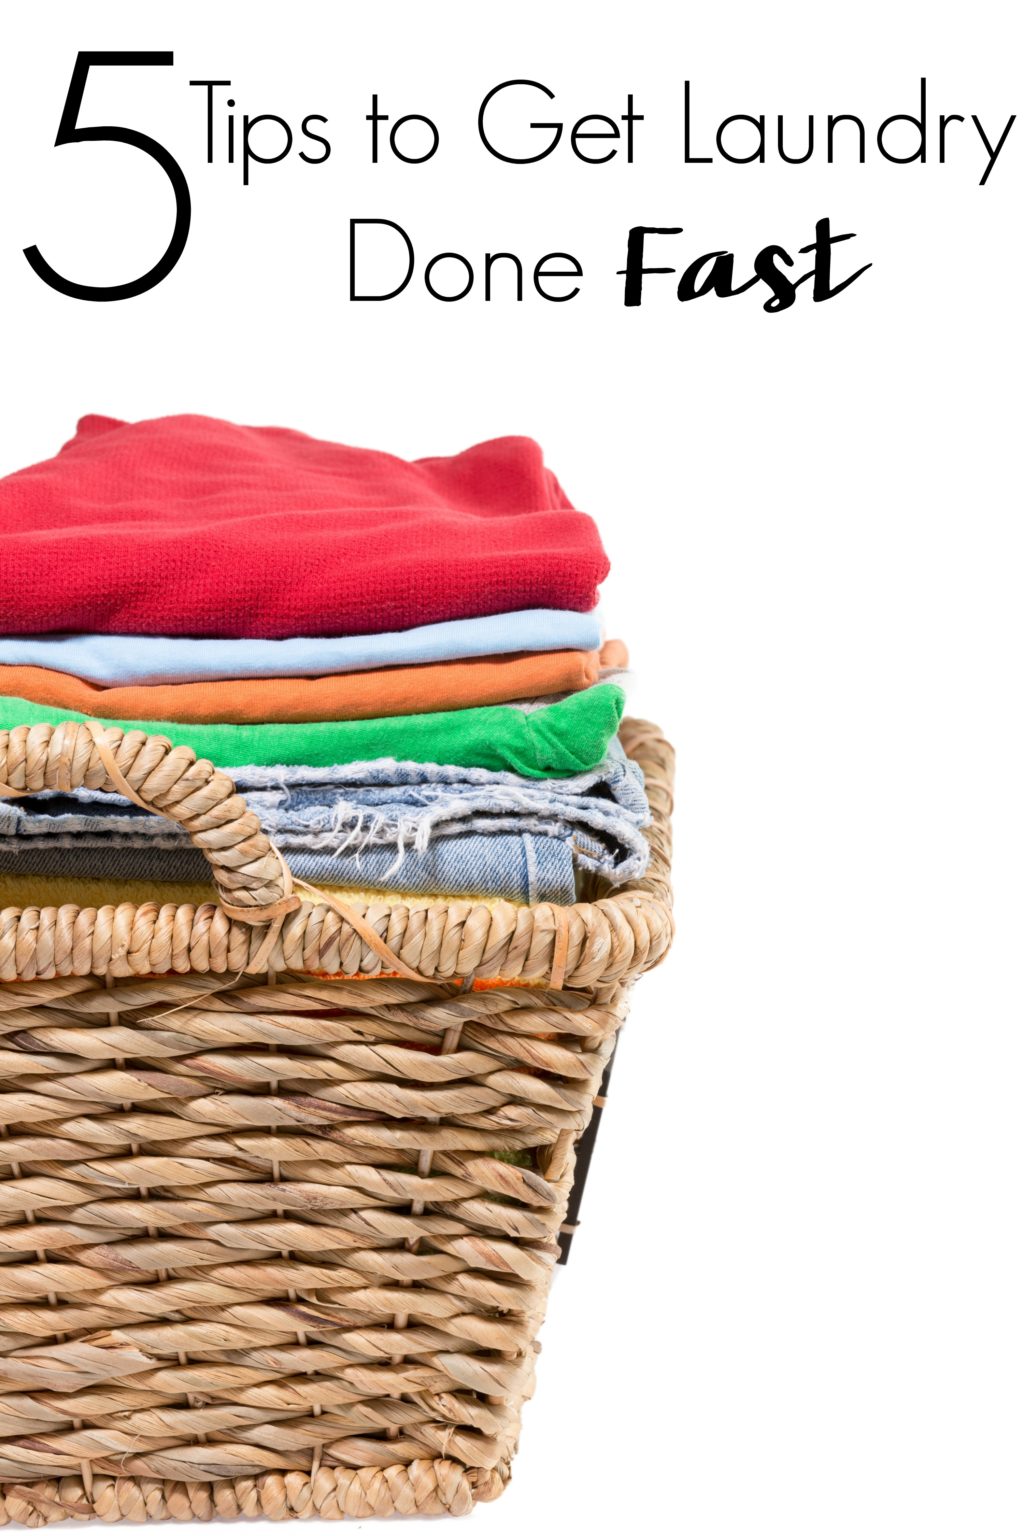 Don't allow mountains of laundry to dictate your days. Instead try these 5 Tips to Get Laundry Done Fast so you can get on with your life!